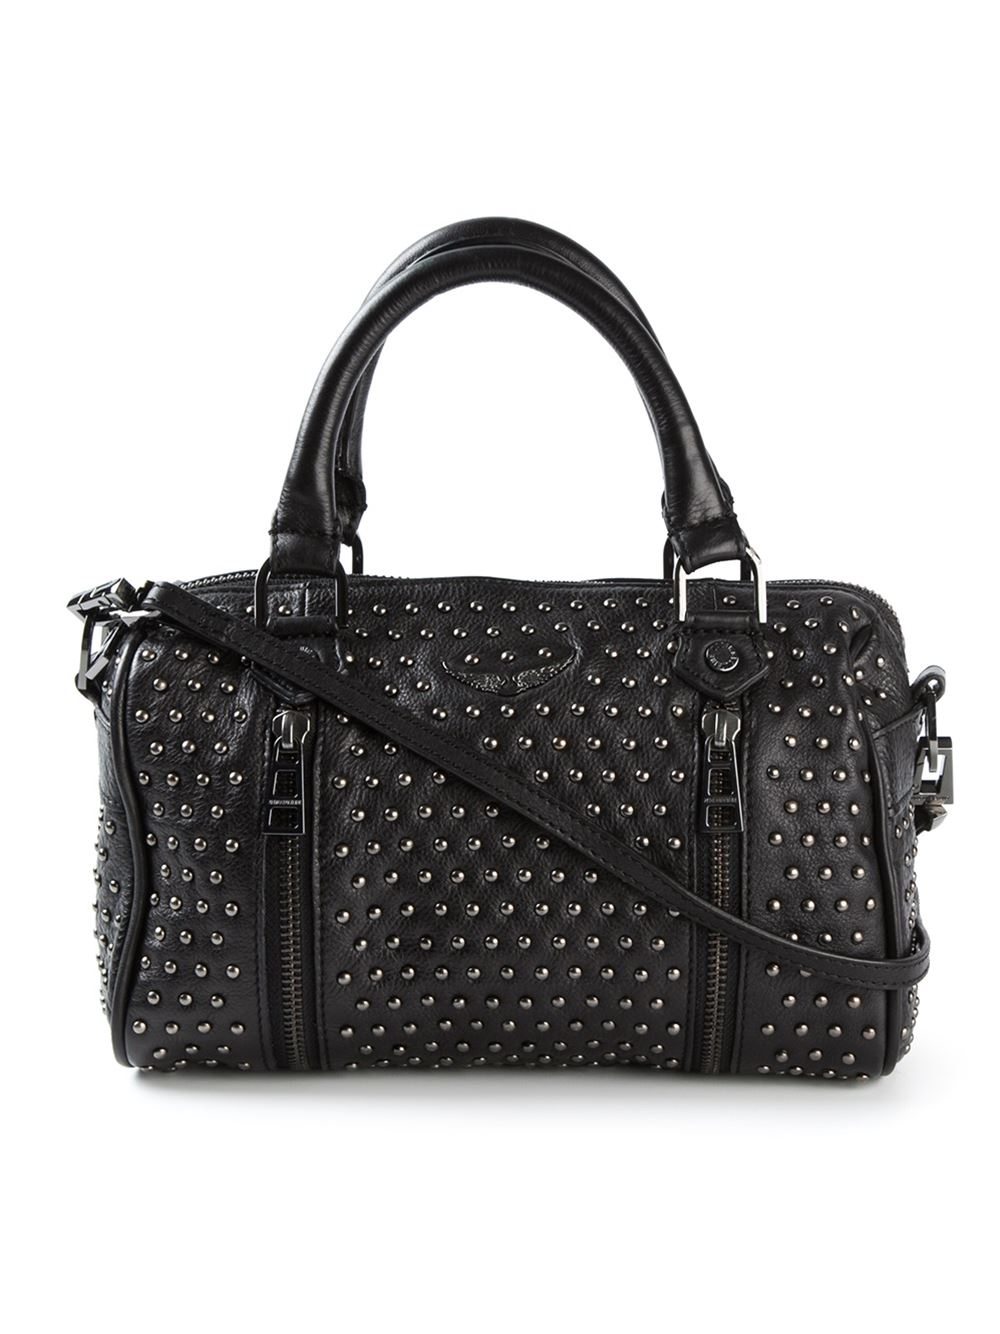 Lyst - Zadig & Voltaire Sunny Extra-Small Studded Leather Shoulder Bag ...